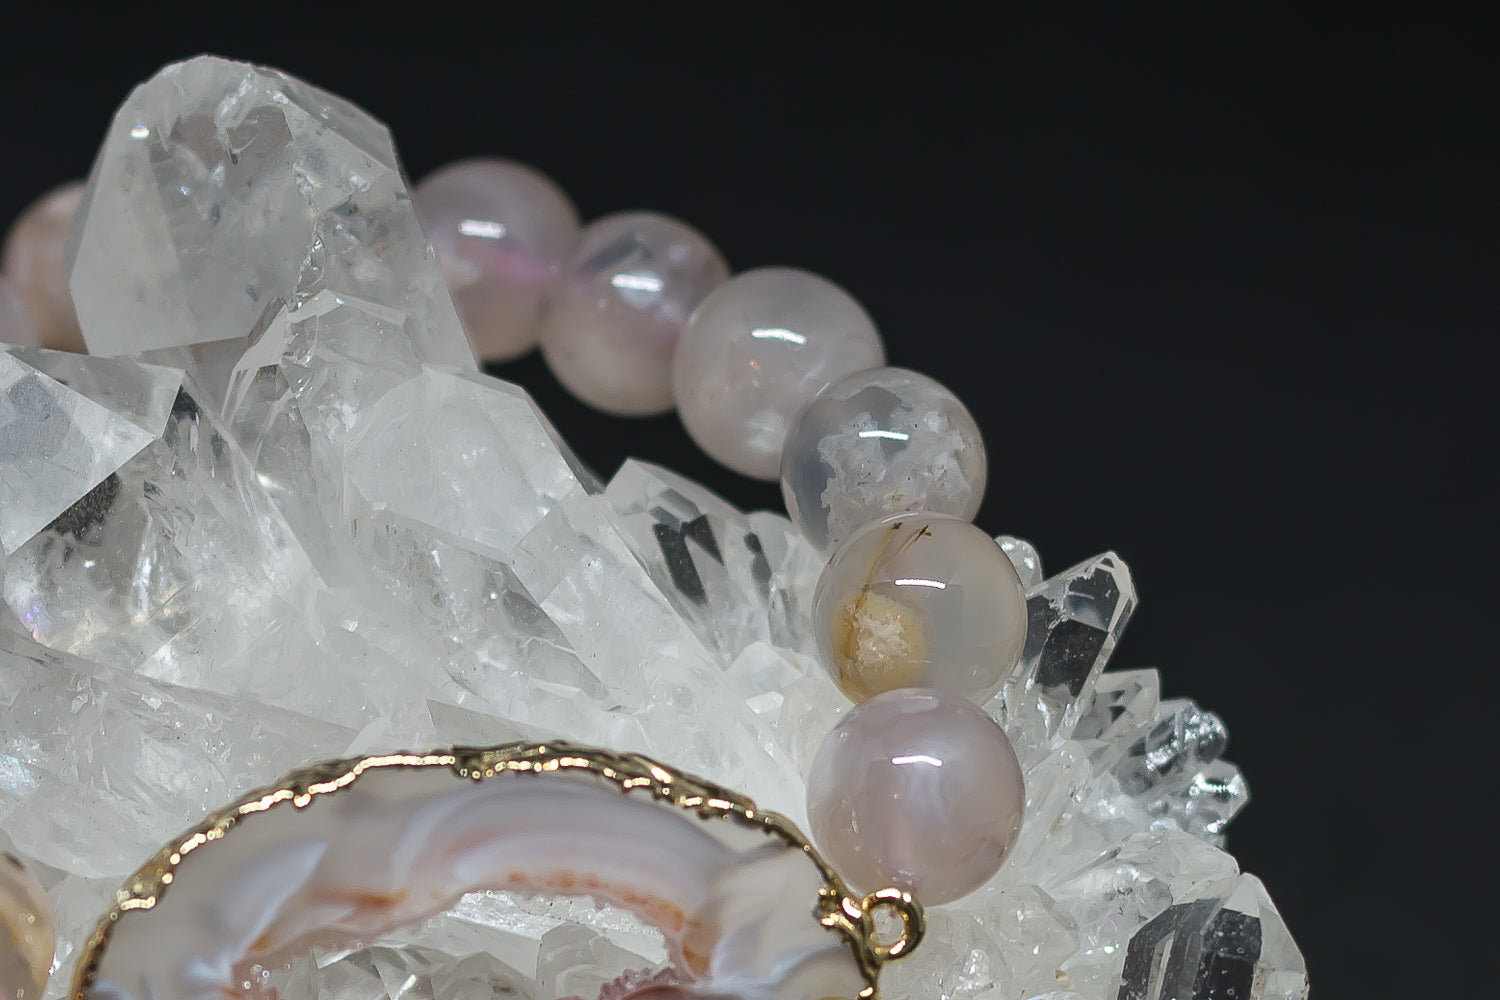 Flower Agate Stretchy Bracelet with Druzy Agate Oco Geode Slice Electroplated in Gold